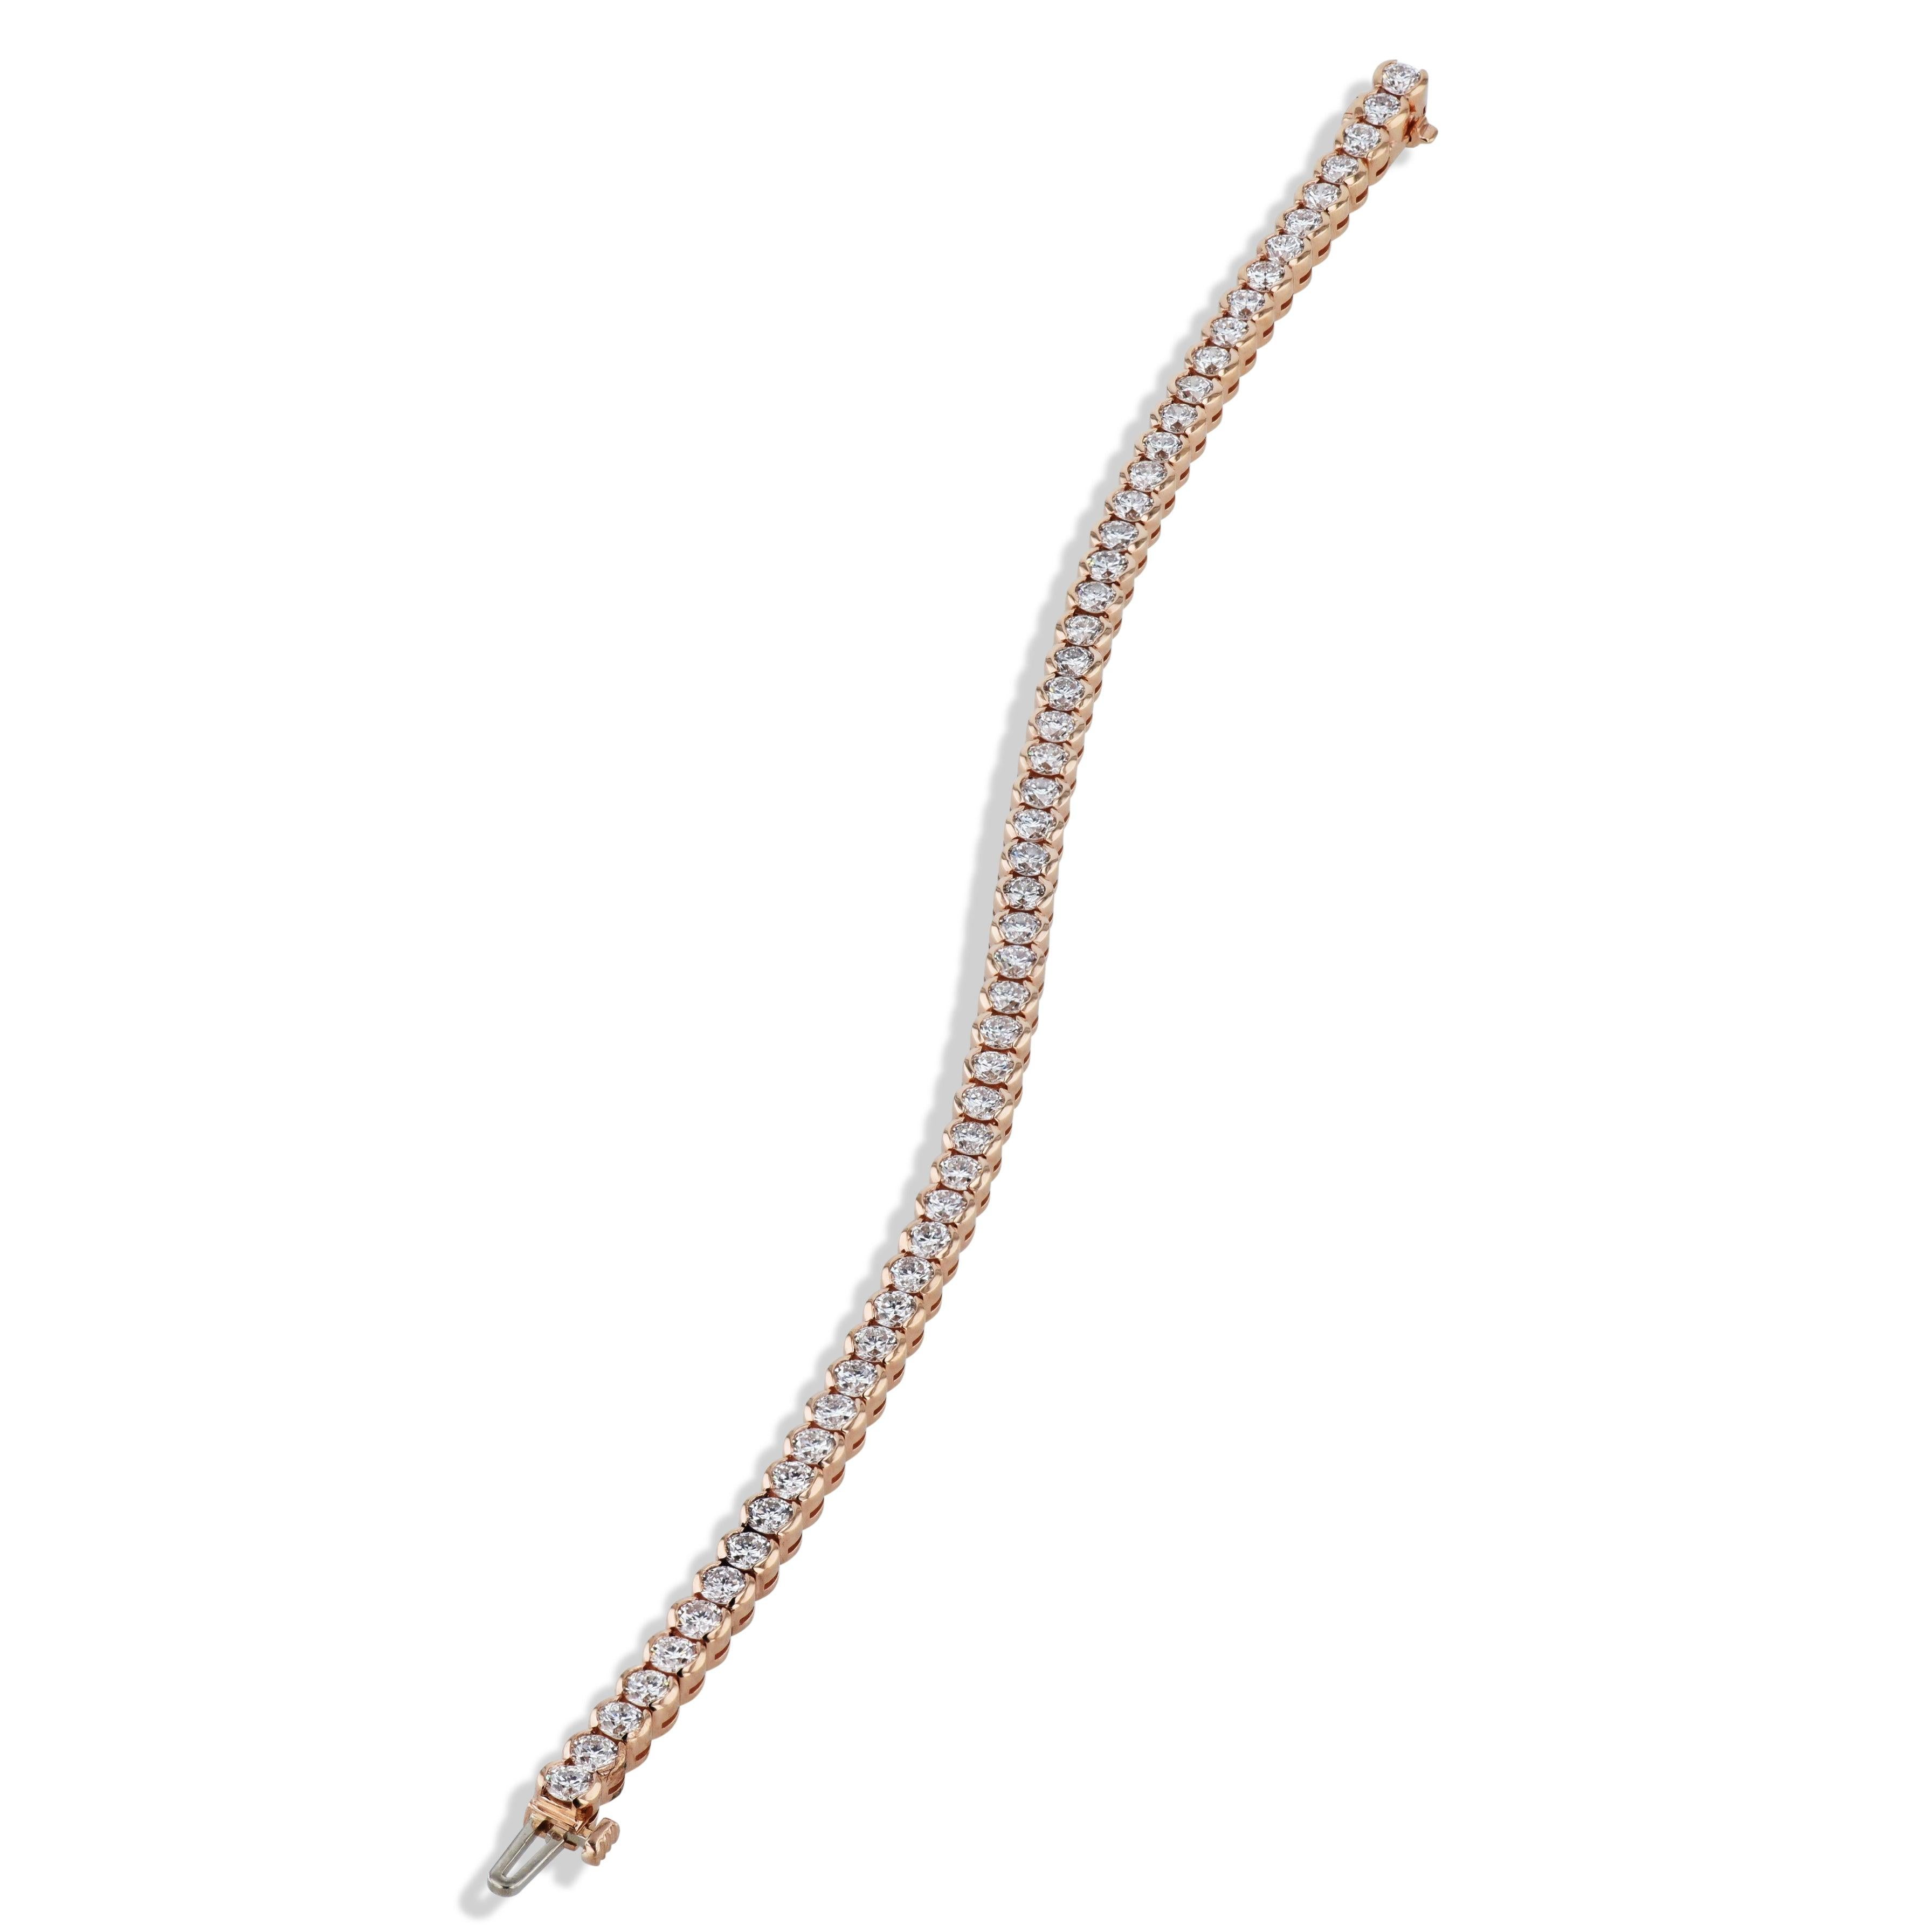 This exquisite 18kt. Rose Gold Diamond Tennis Bracelet captures elegance and style! 
Featuring 54 diamonds totaling 6.38 carats, these sparkling jewels are brilliantly semi-bezel set by hand. 
Diamond  Rose Gold Tennis Bracelet.

7 inches
18kt. Rose